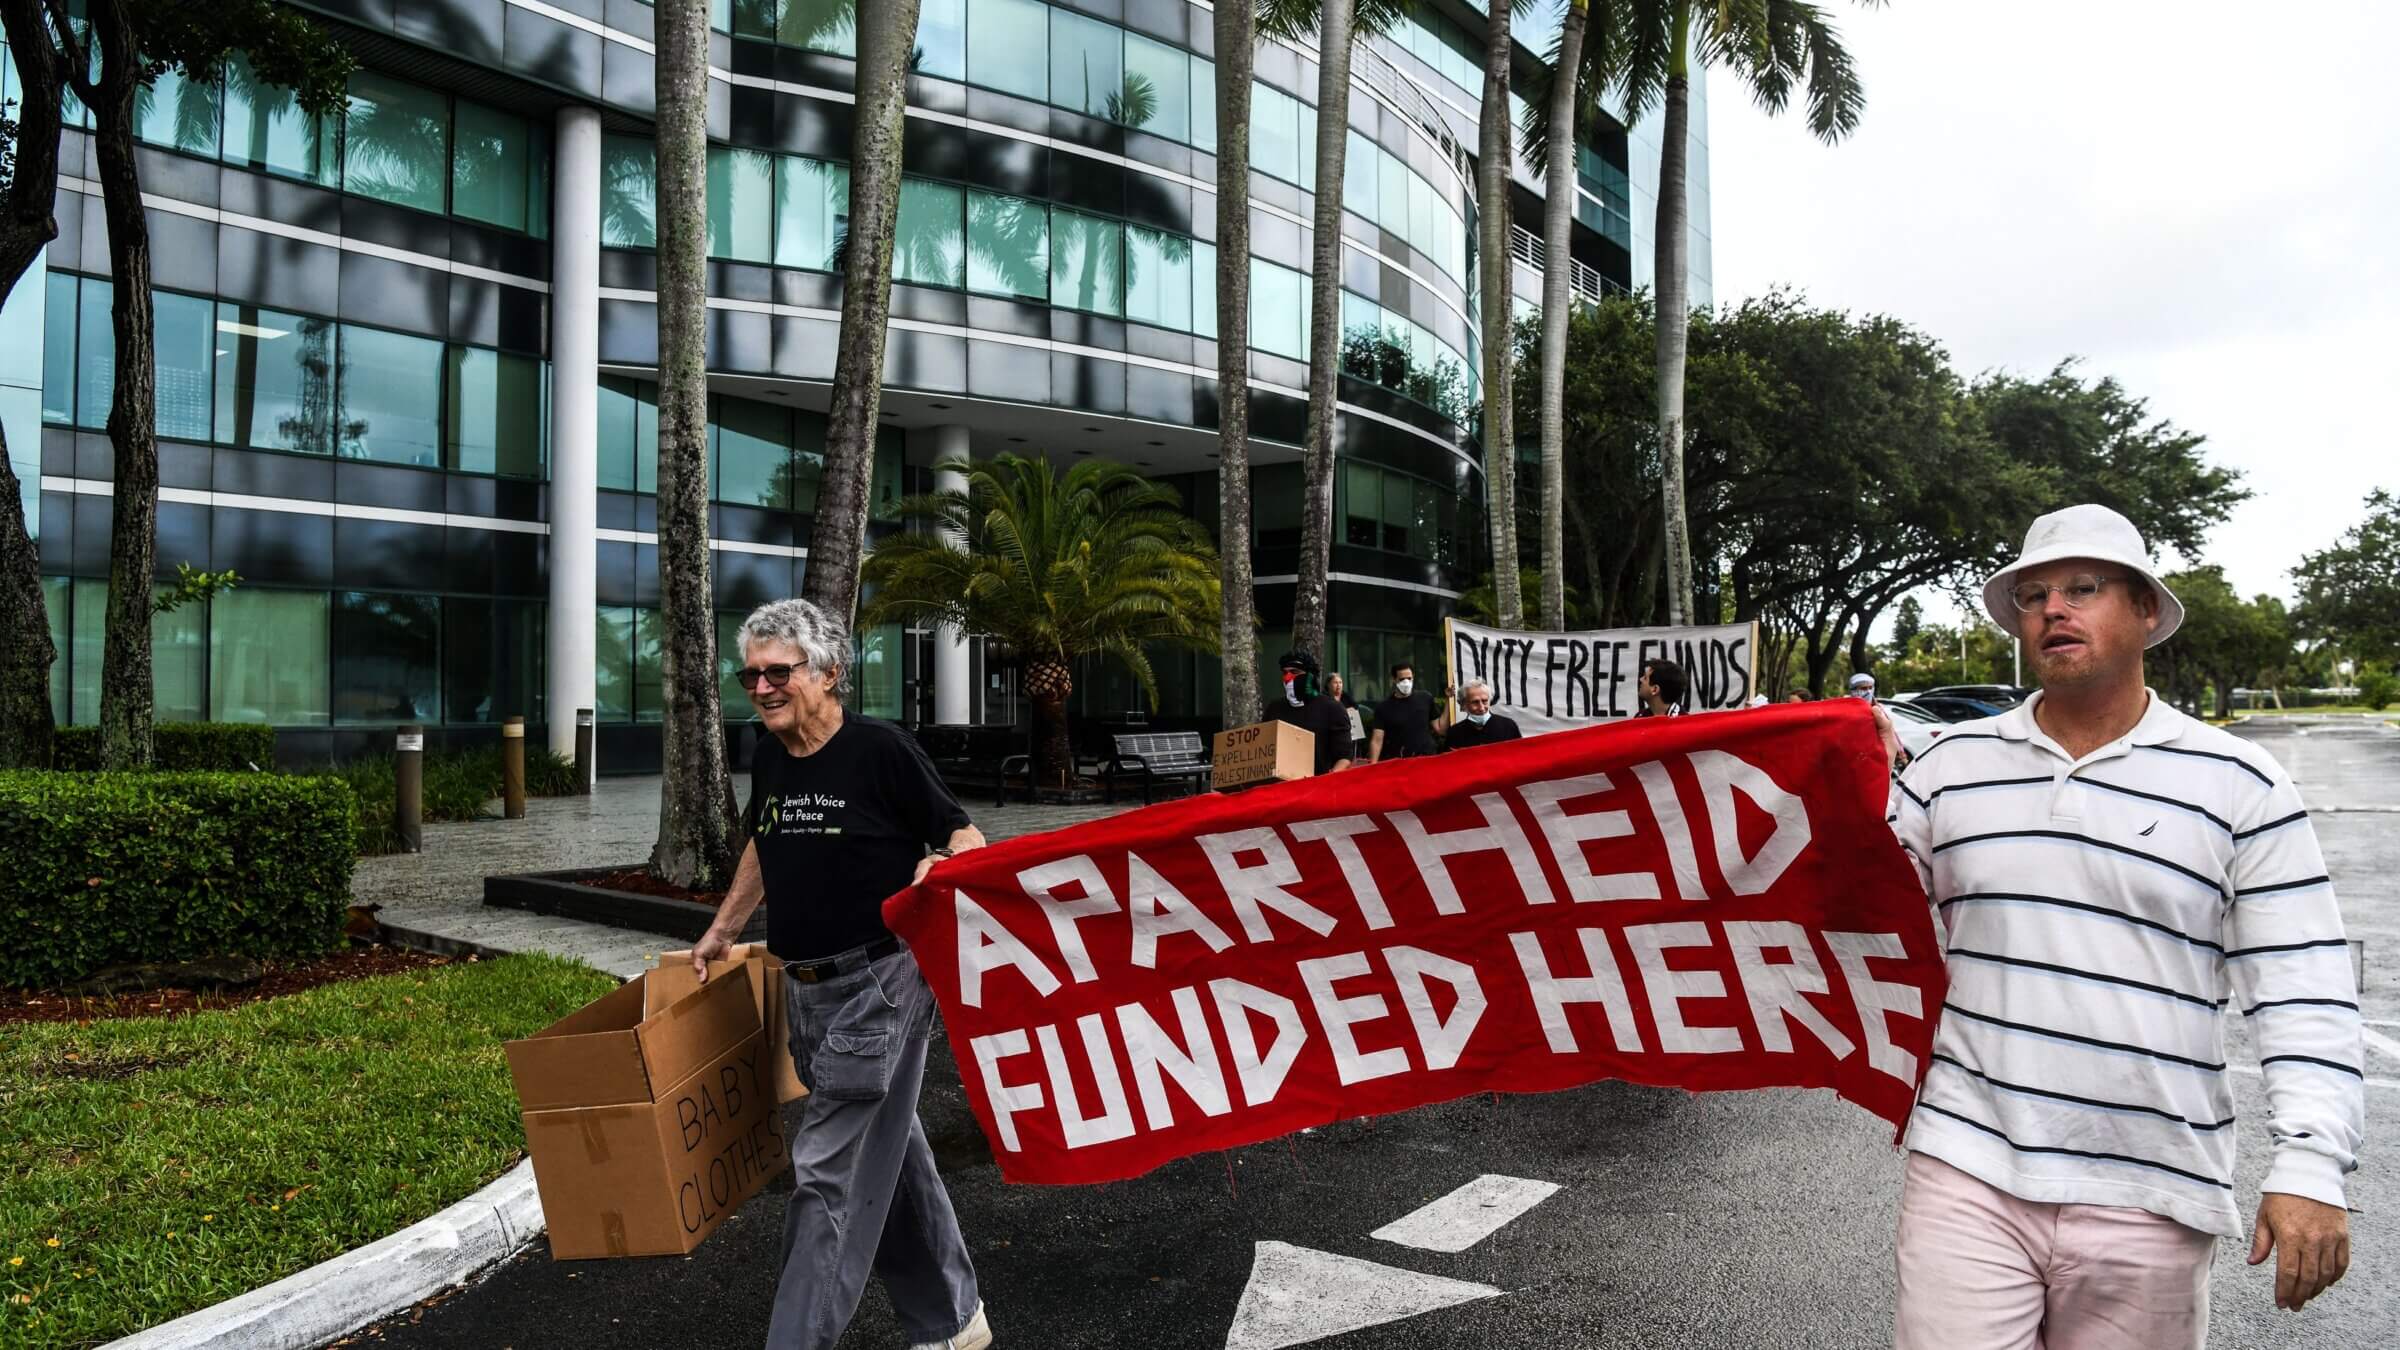 A map released earlier this month created controversy by listing addresses of companies and other entities it claimed were tied to Israeli human rights abuses. Pro-Palestinian activists often target such entities for protest, such as this demonstration last year outside the Duty Free Americas Headquarters in Florida, whose owners have donated millions to Israeli settlements in the occupied West Bank.